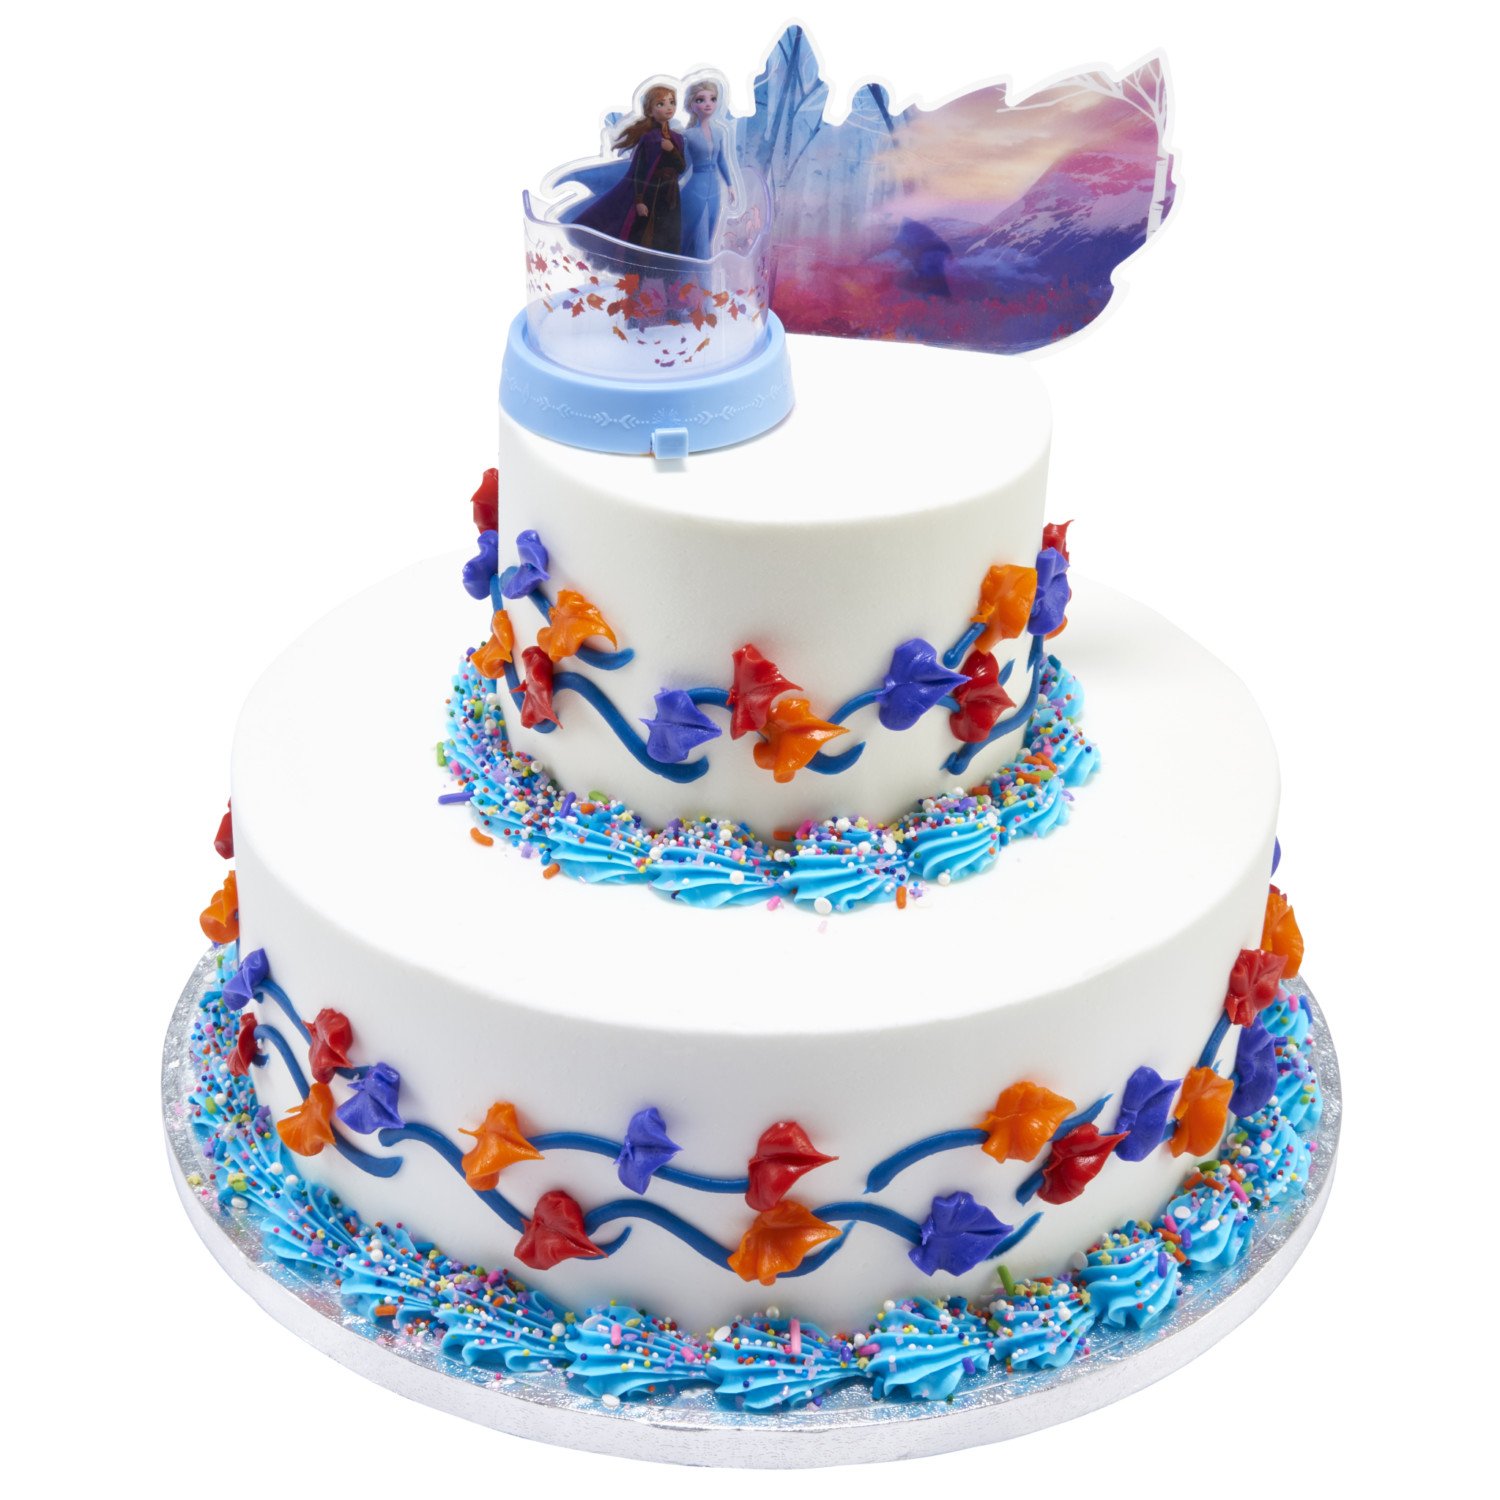 frozen 2 cake at sams club feeds 66 people simplemost